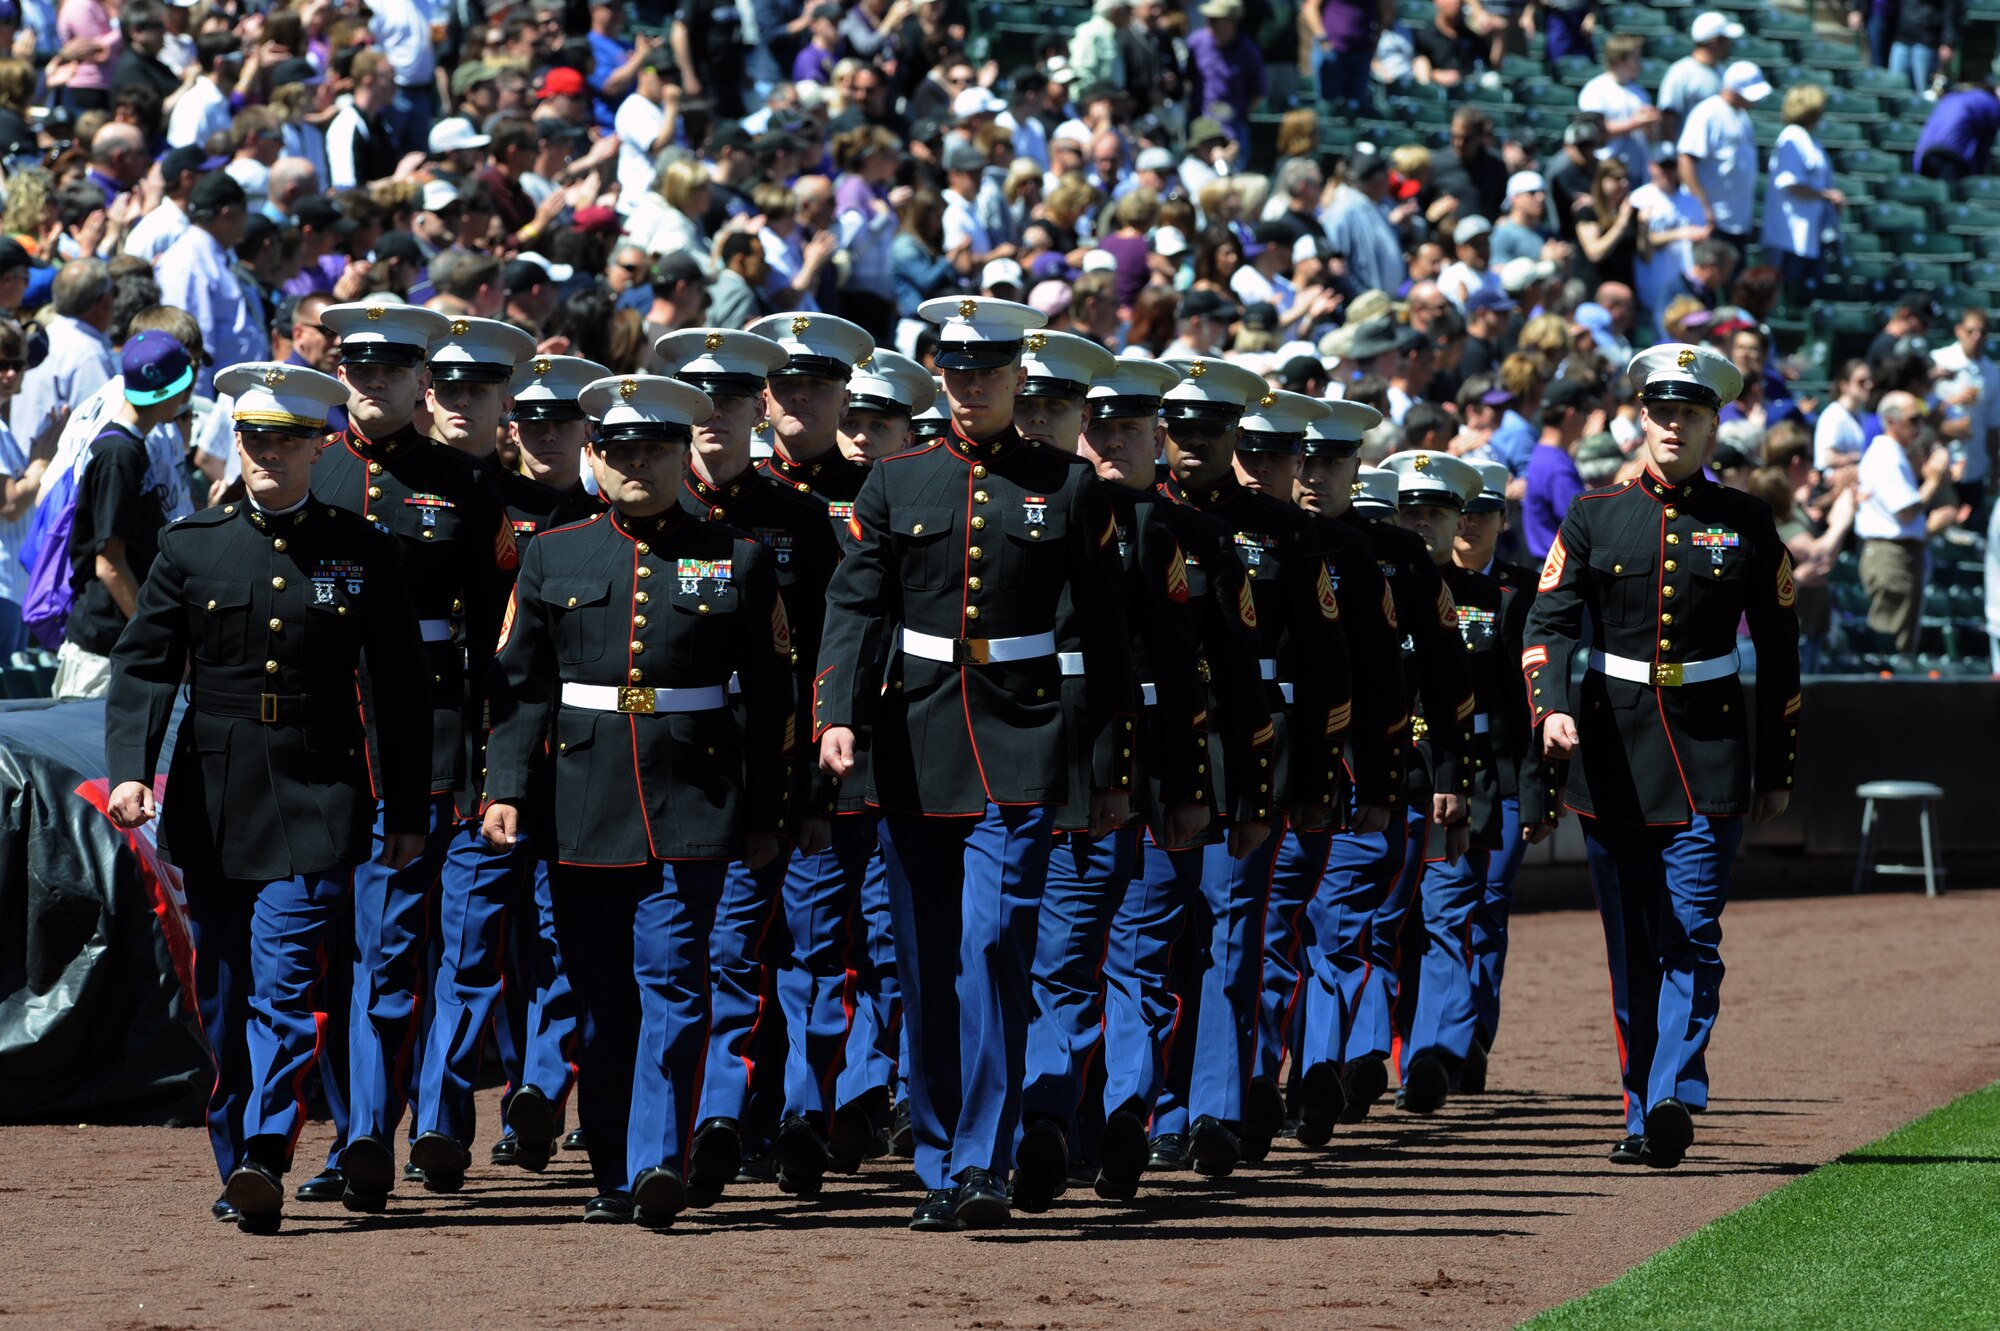 DENVER, Colo. -- Marines from Colorado recruiting stations and Buckley Air Force Base perform ceremonial guardsmen duties during the opening day festivities for the Colorado Rockies April 9. (U.S. Air Force photo by Airman 1st Class Marcy Glass)